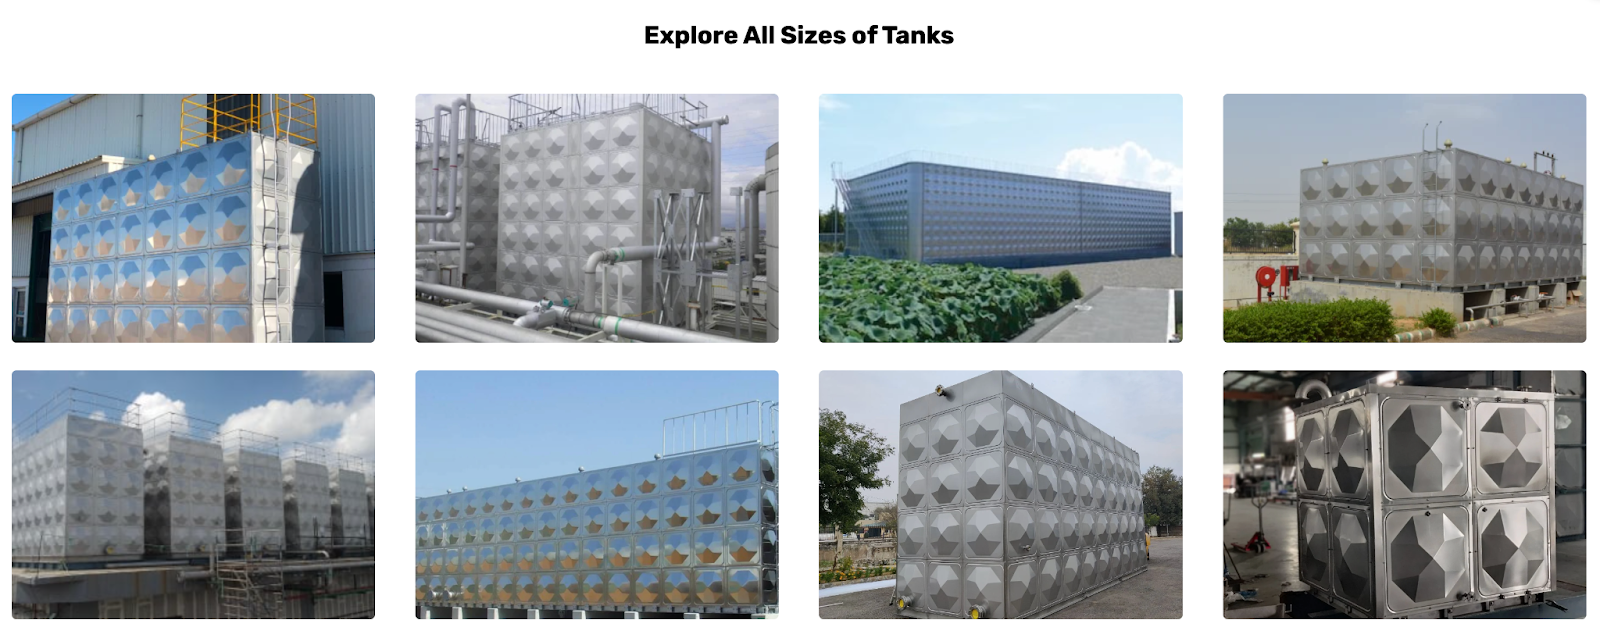 An image showing the different types of stainless steel water storage tanks, manufactured by Beltecno